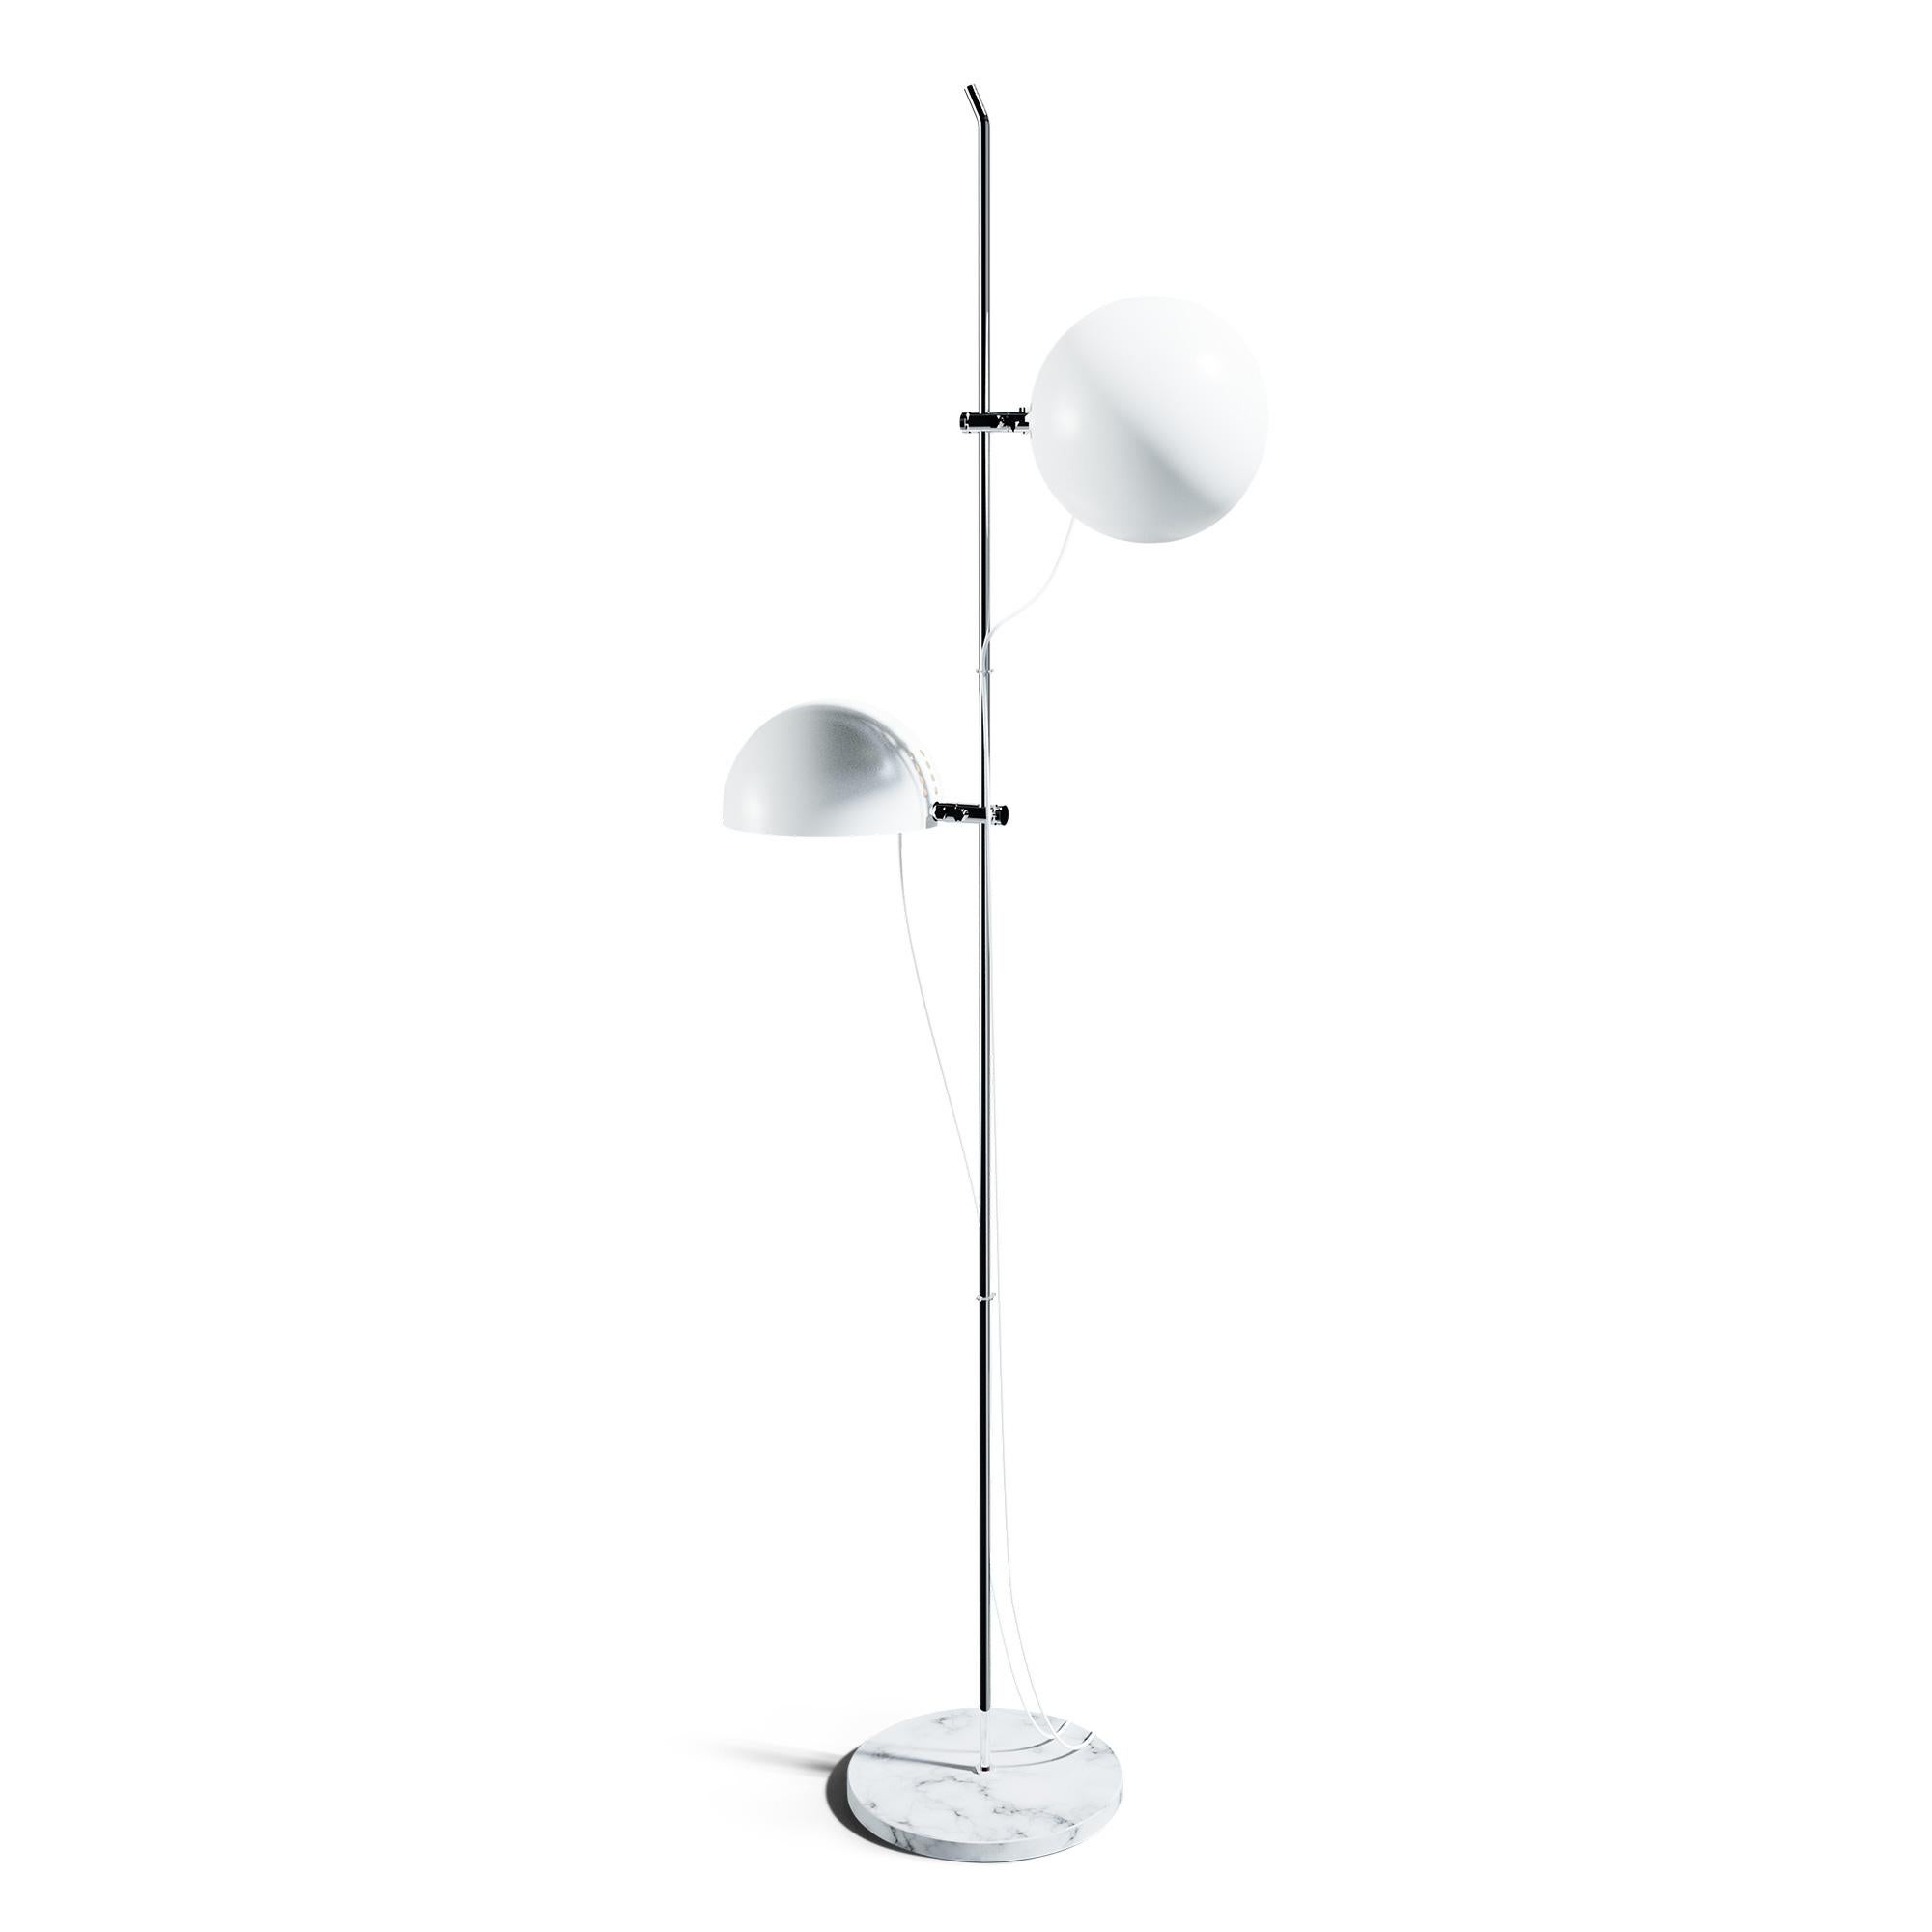 Alain Richard 'A23' Metal and Marble Floor Lamp for Disderot in Orange In New Condition For Sale In Glendale, CA